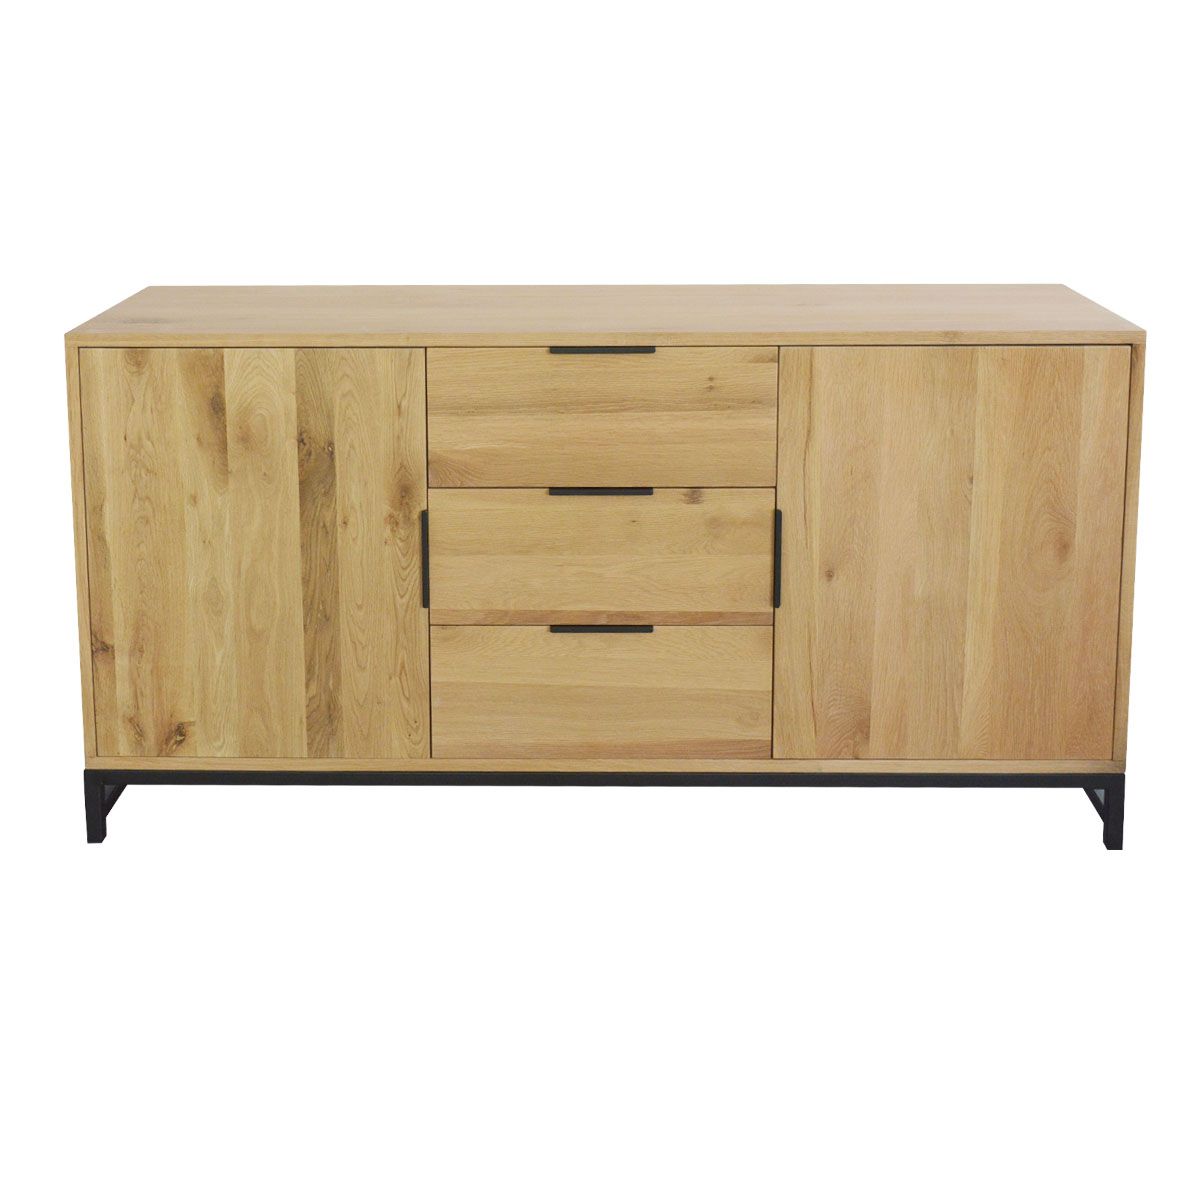 Details About Detroit Industrial Loft Oak Buffet Sideboard Storage Cabinet  Cupboard Dresser For Contemporary Style Wooden Buffets With Two Side Door Storage Cabinets (Photo 23 of 30)